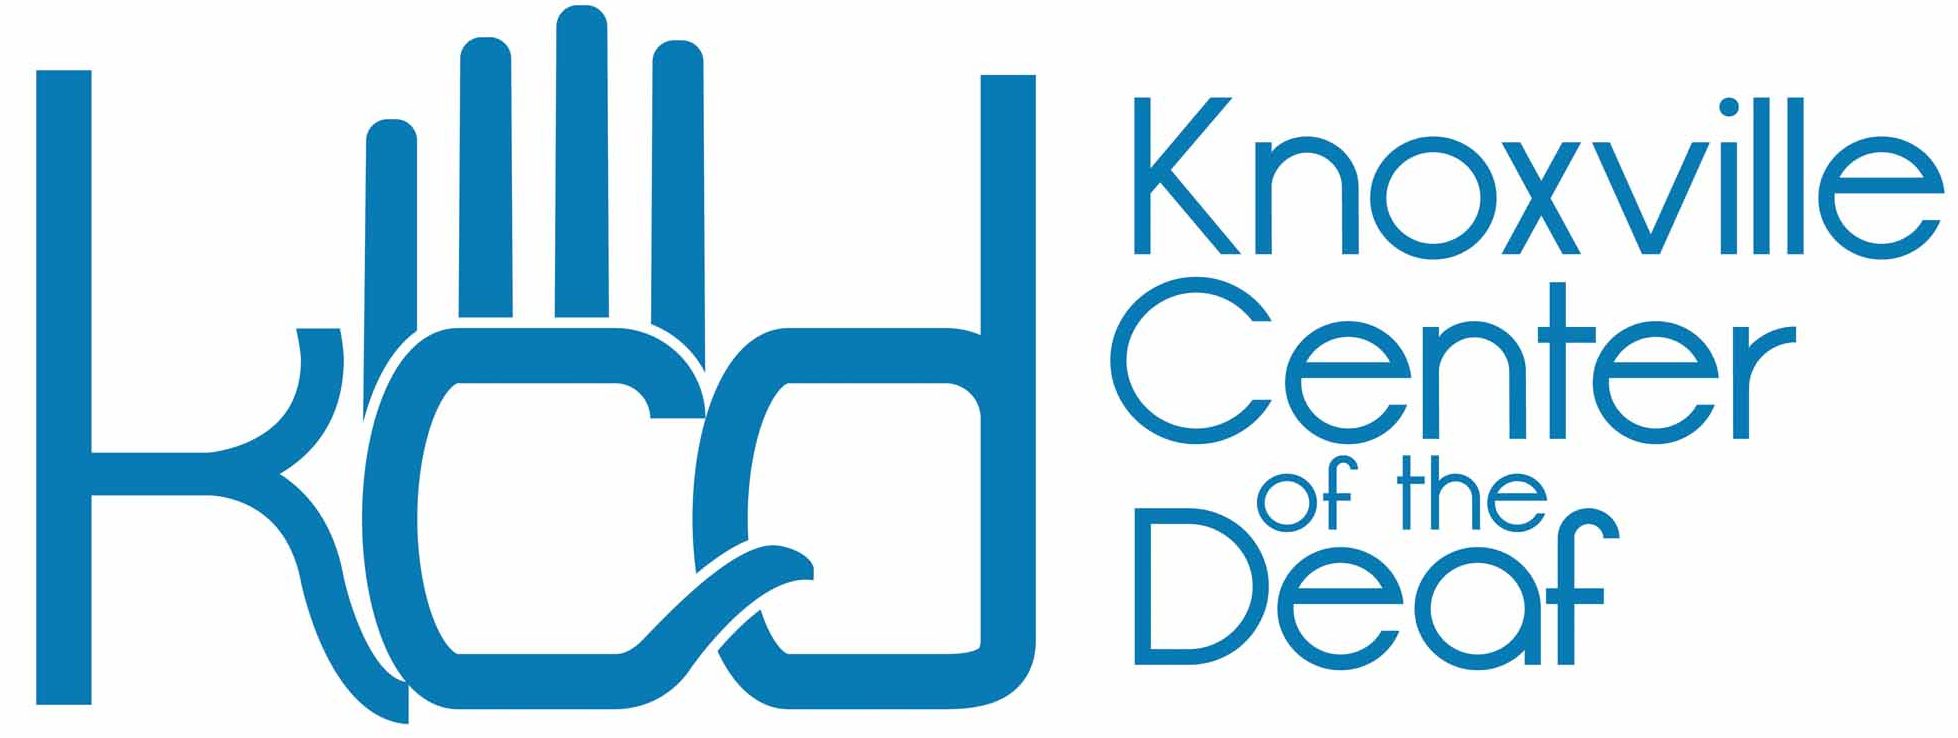 Knoxville Center of the Deaf